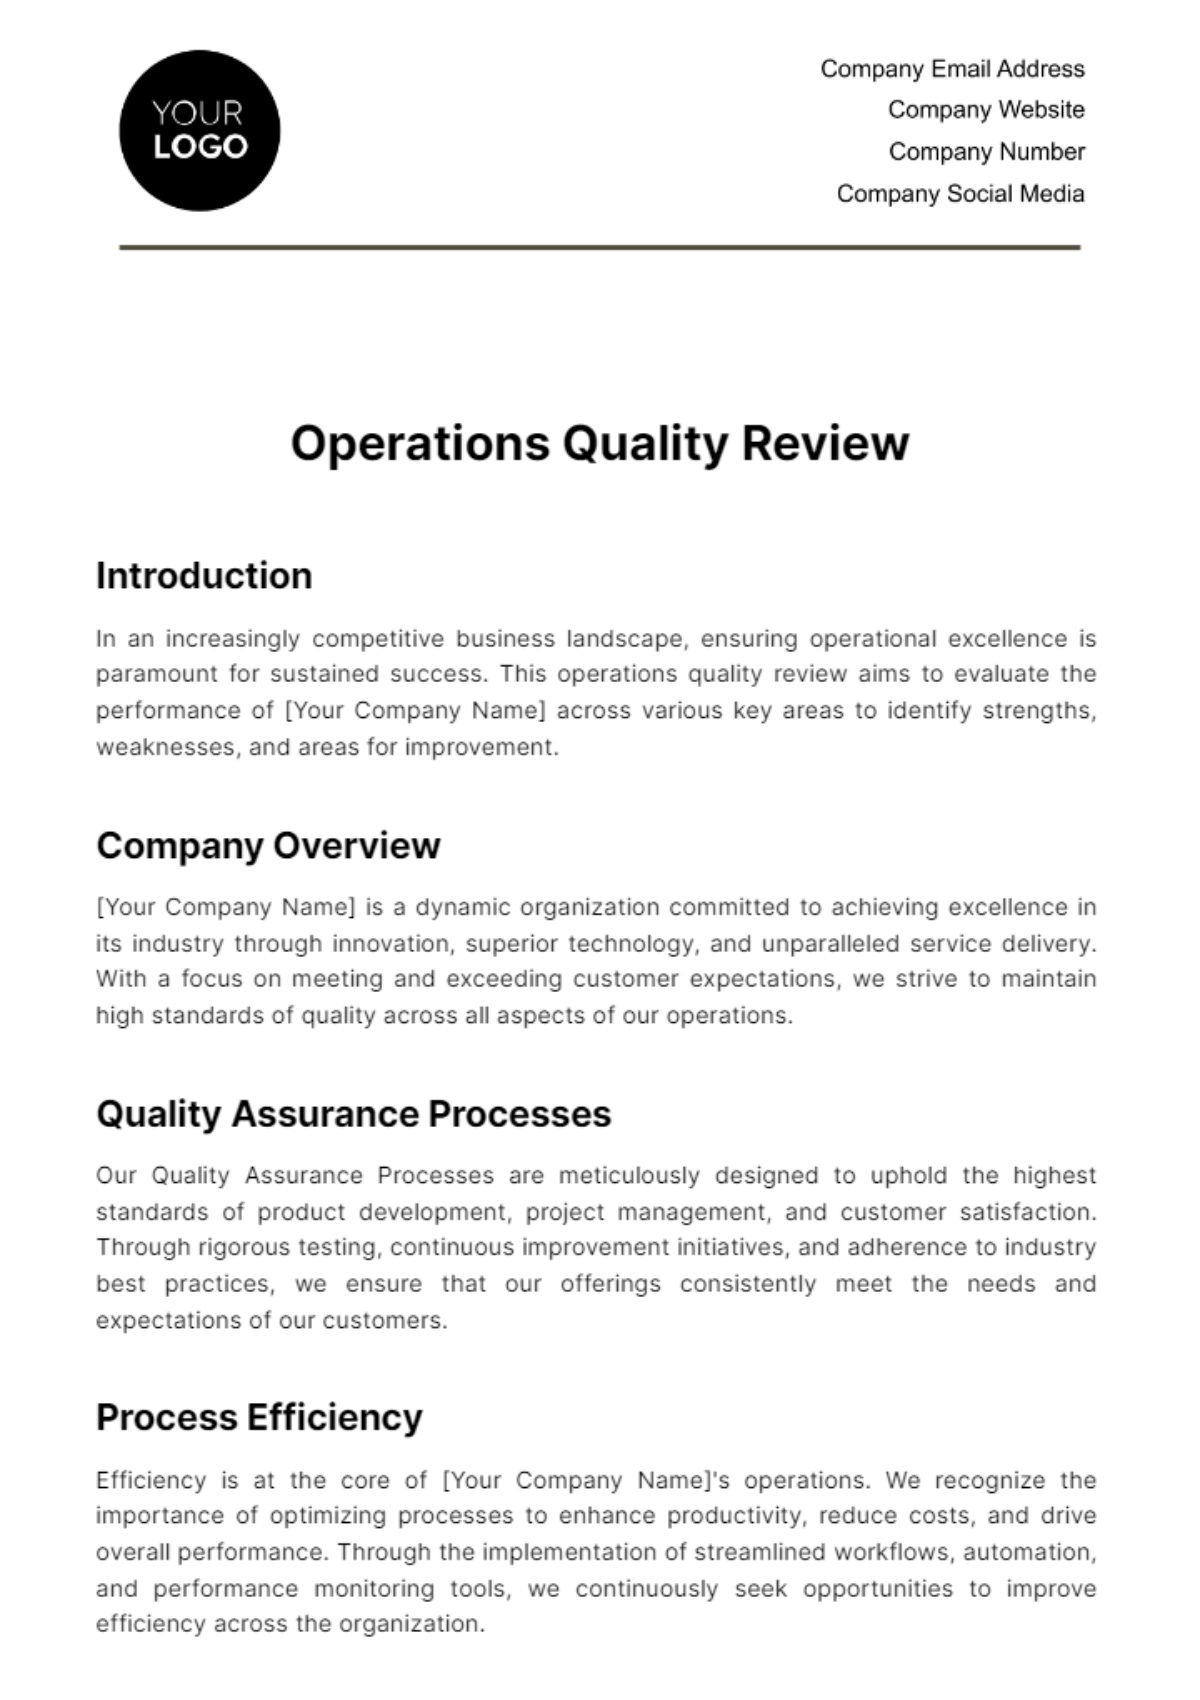 Free Operations Quality Review Template